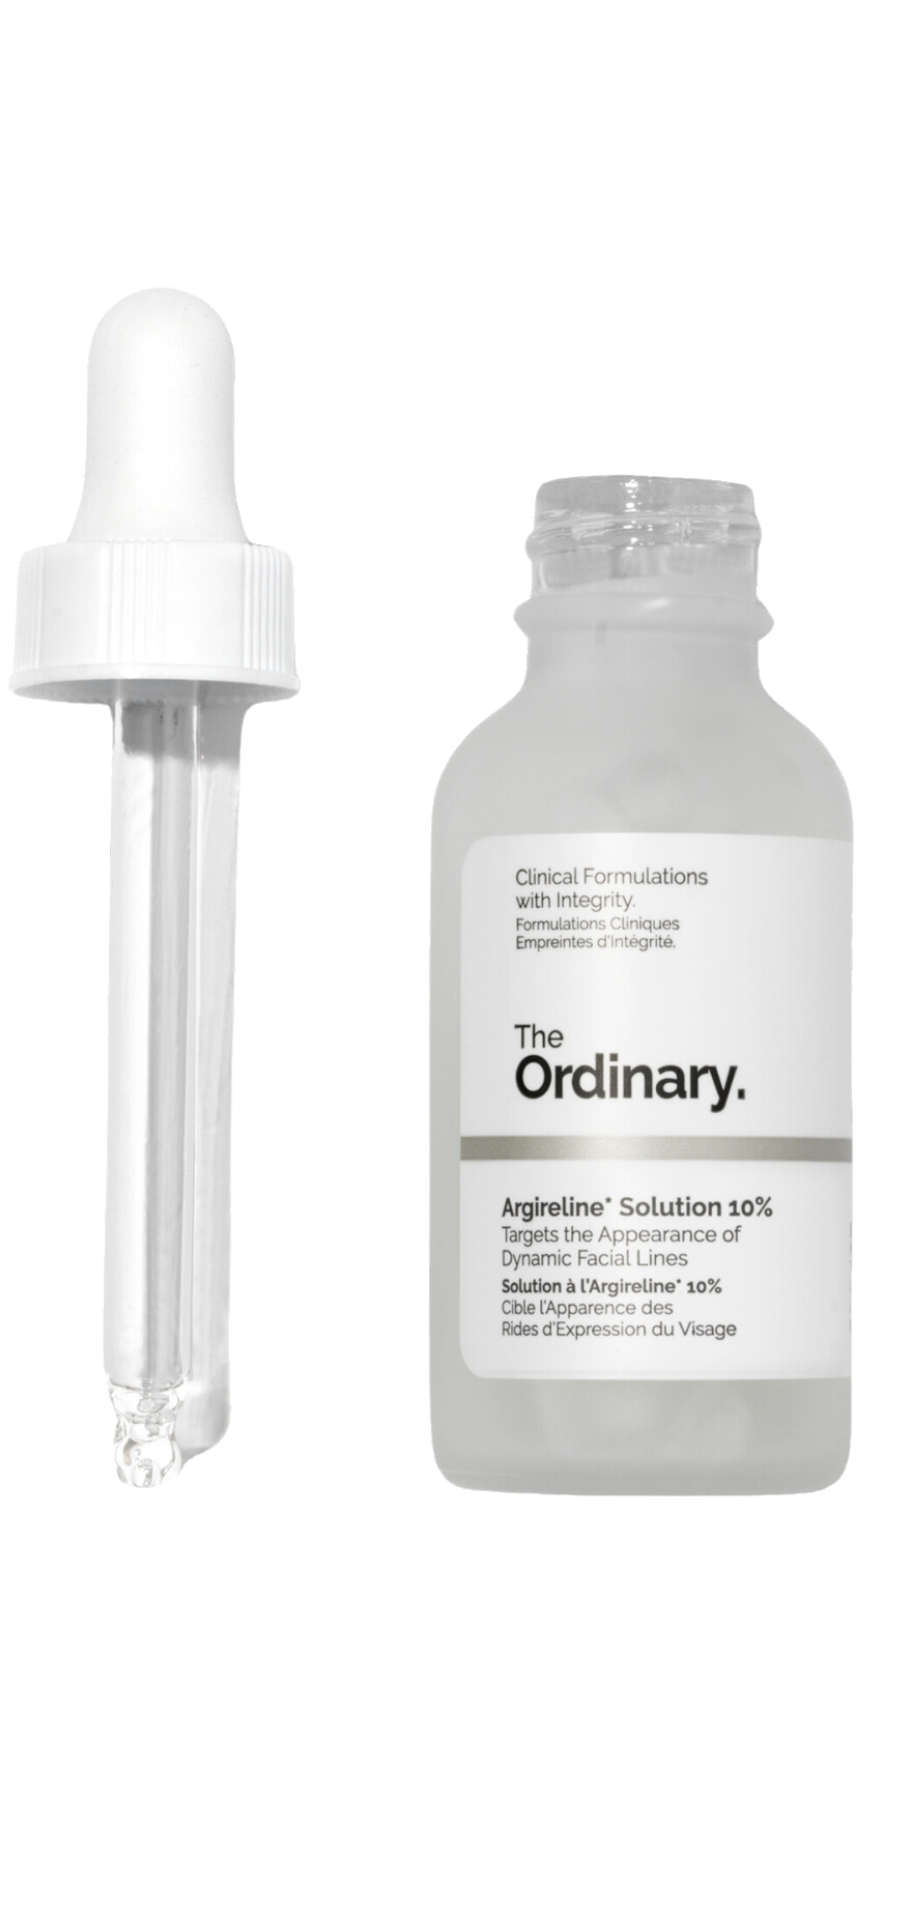 The Ordinary Squalane Cleanser – 50ml